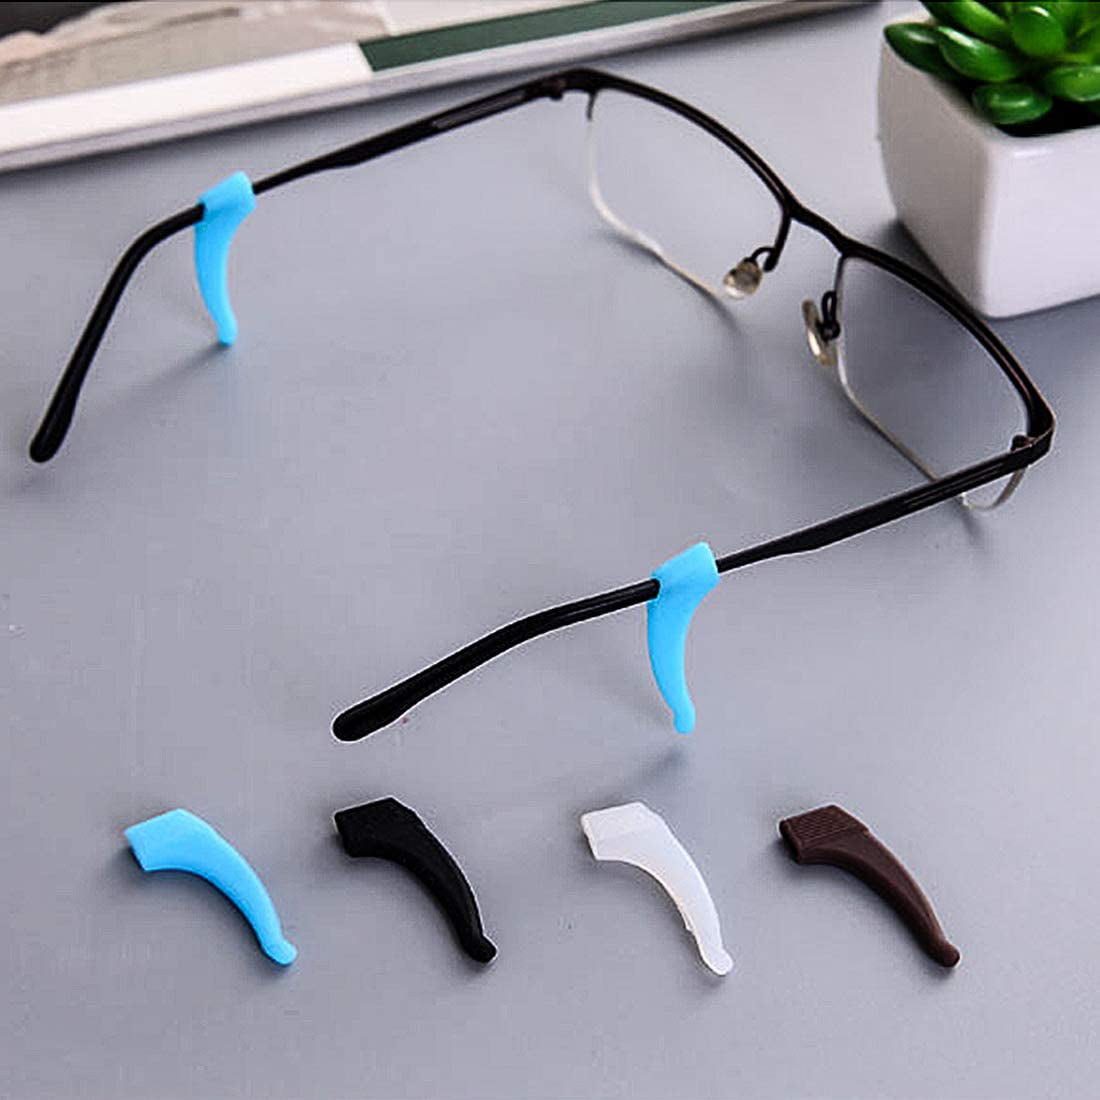 Eyeglass Temple Tip Suitable for Kids and Adults. Soft Eyewear Retainer for Glasses Piece 6 Pairs Sport Eyeglass Strap Holder Ear Grip Hooks Silicone Anti Slip Holder 